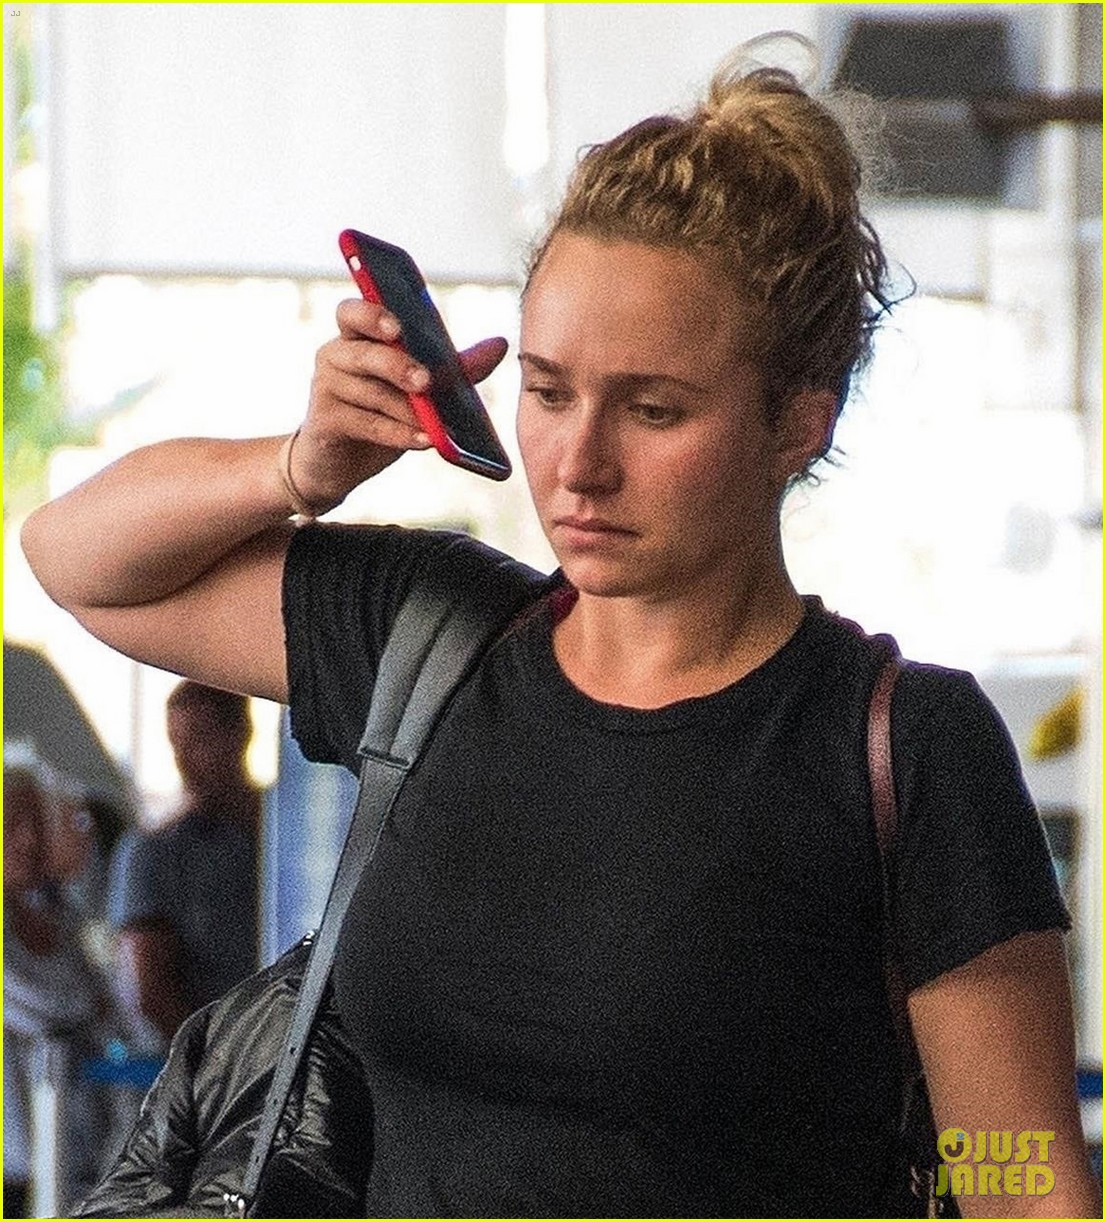 hayden panettiere puts injured arm on display while leaving barbados 07